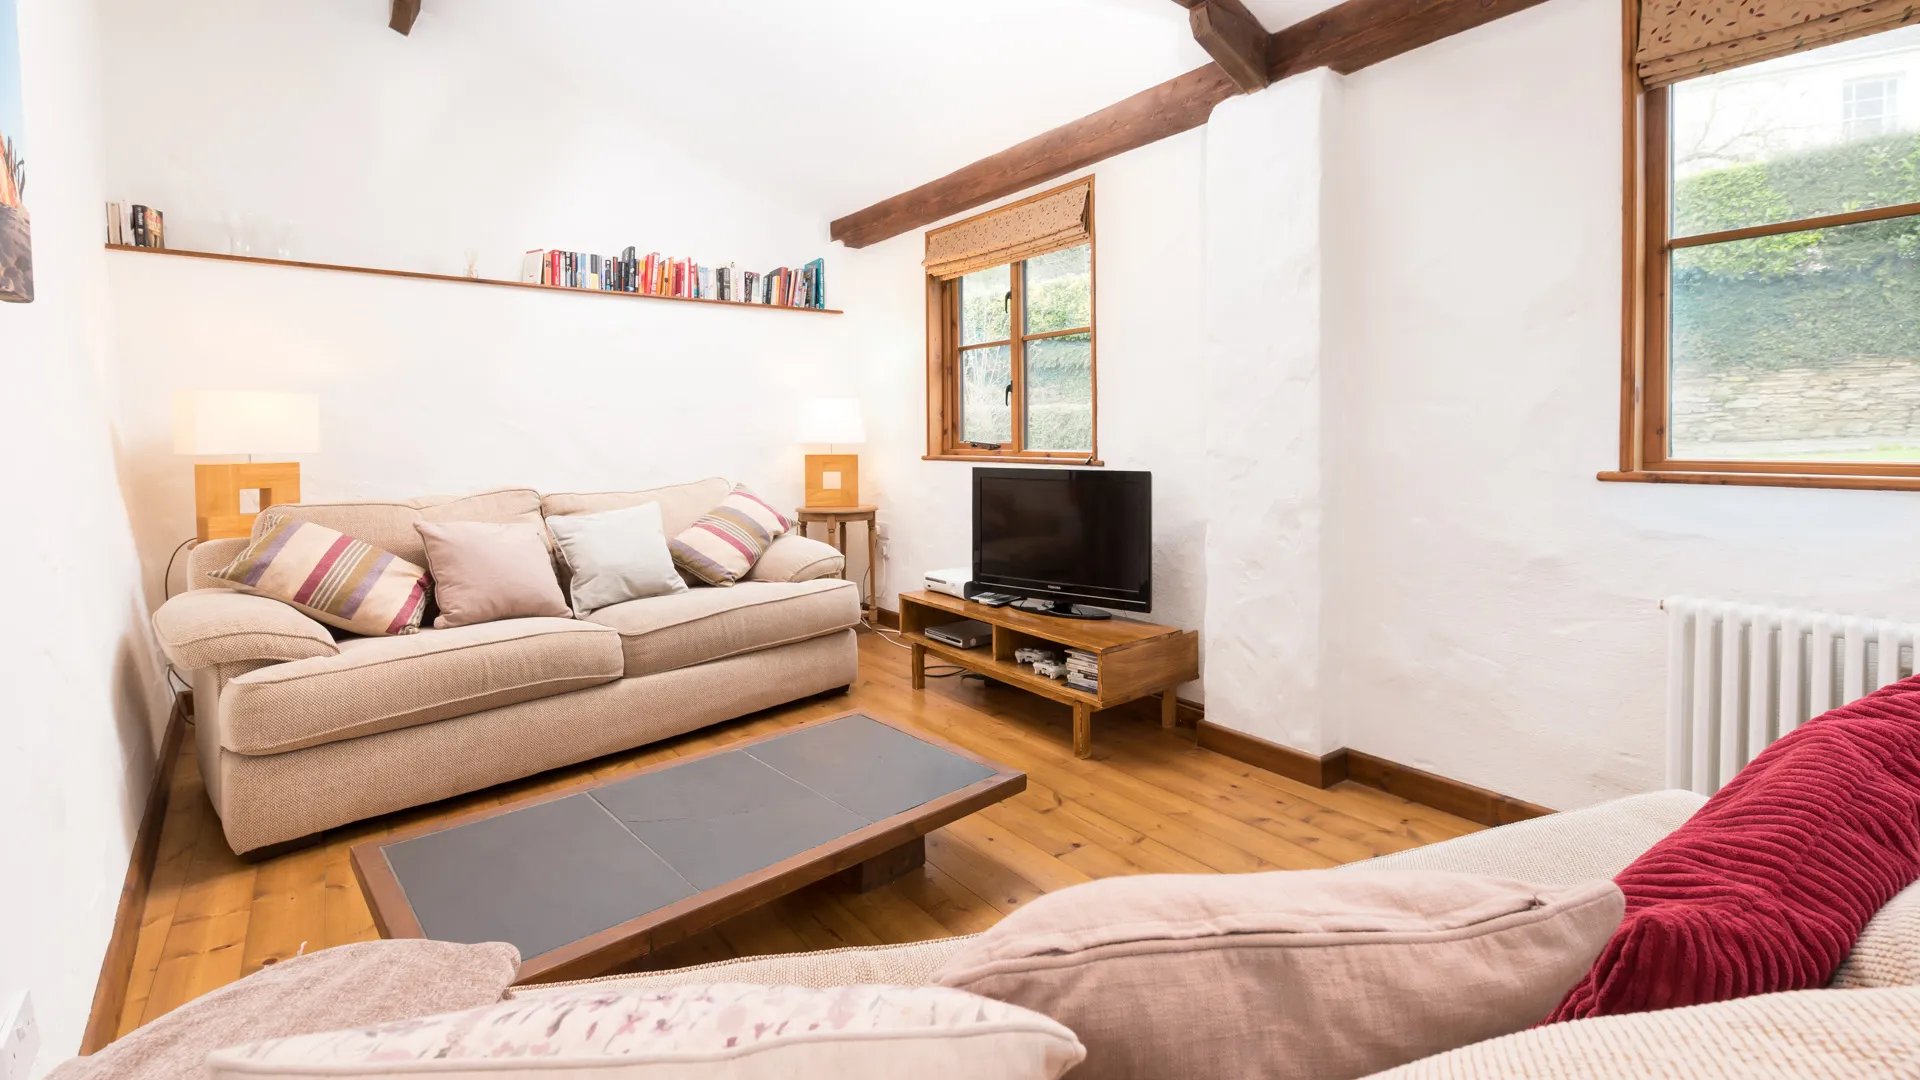 The Byre living area